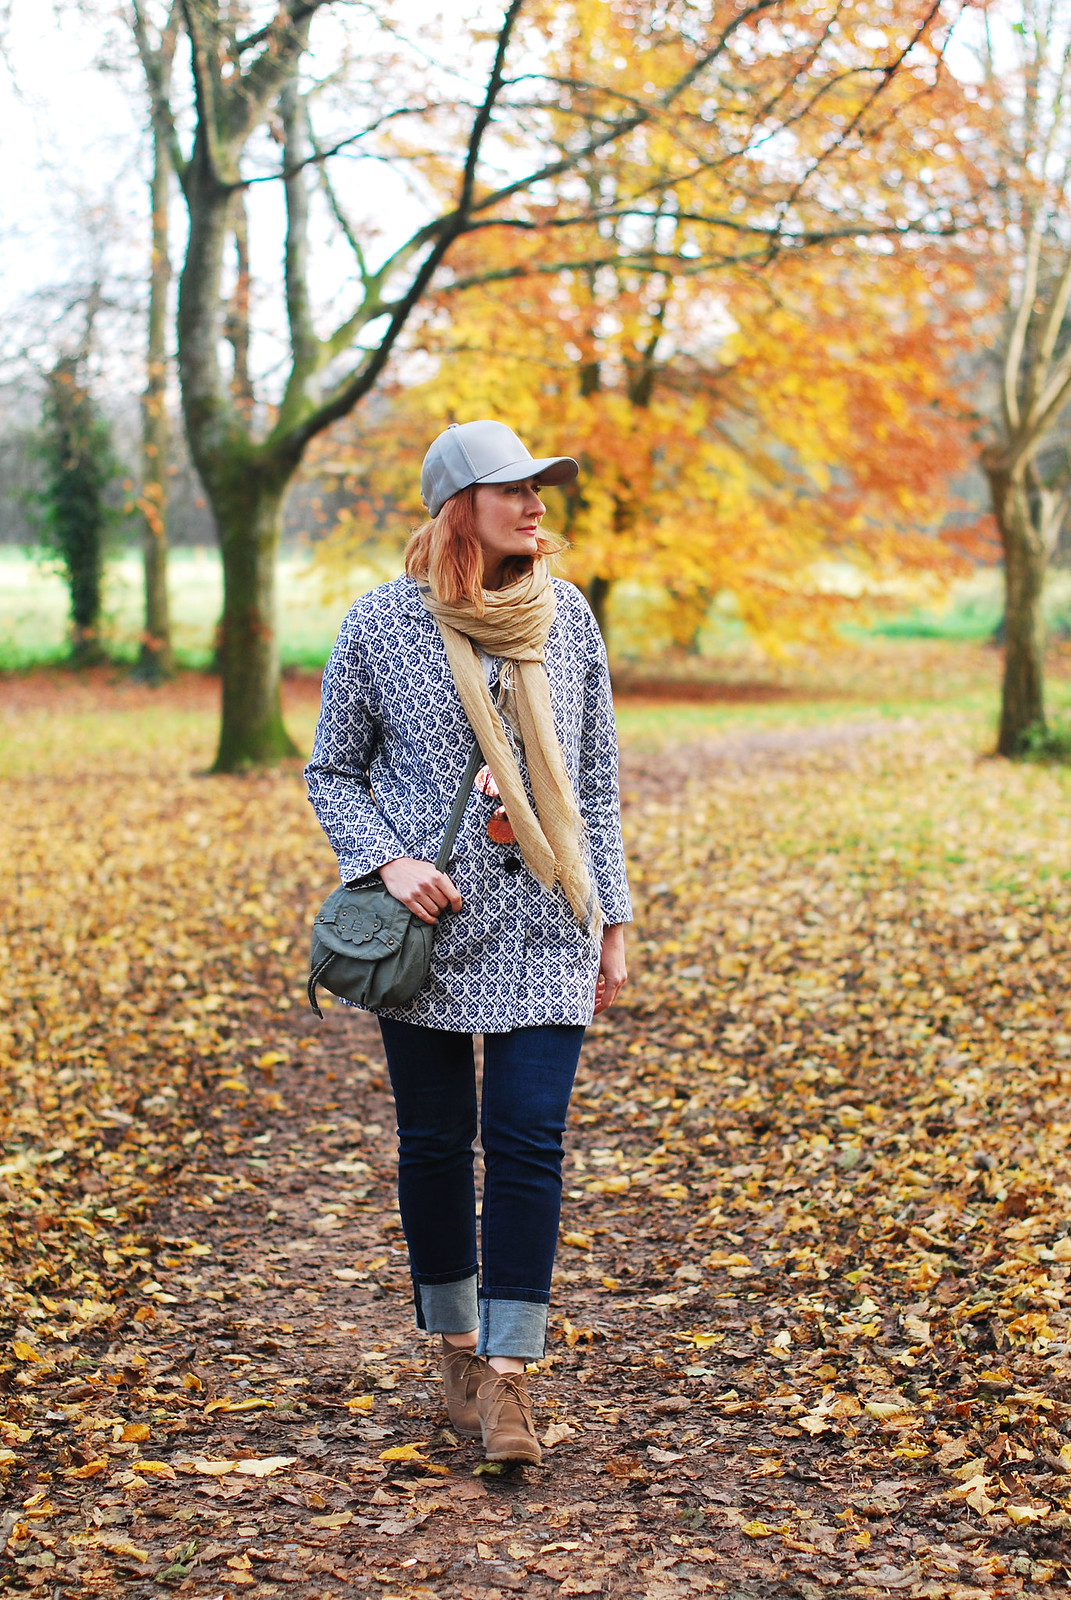 Cold weather walking in the woods walking the dog outfit Tapestry coat, deep hem skinnie jeans, grey cap and wedge desert boots | Not Dressed As Lamb, over 40 style blog